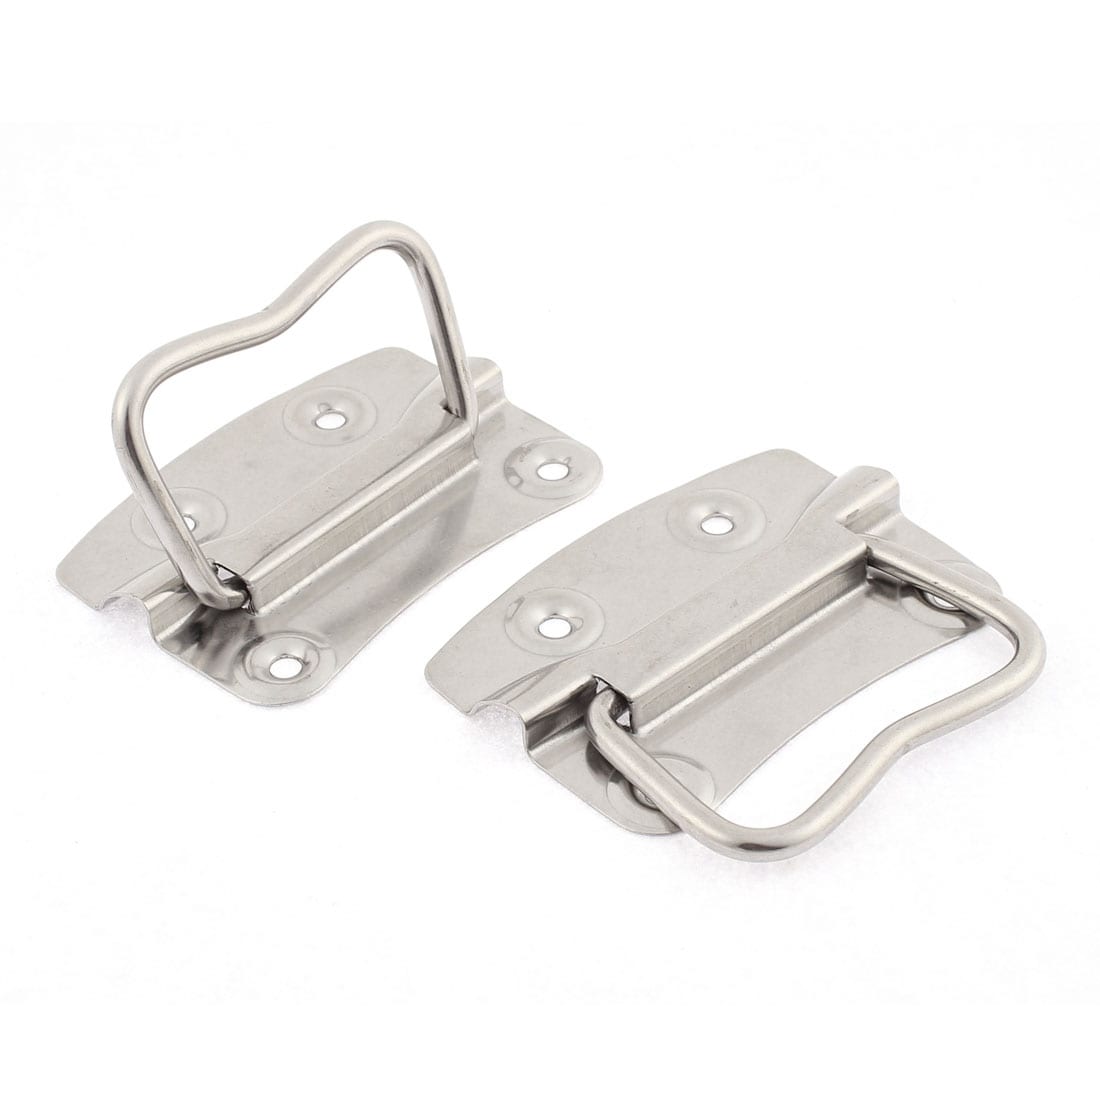 Cabinet Door Box Stainless Steel Folding Pull Handle Pulls Puller 2pcs - Silver Tone - 80mmx73mm, 2 Pcs